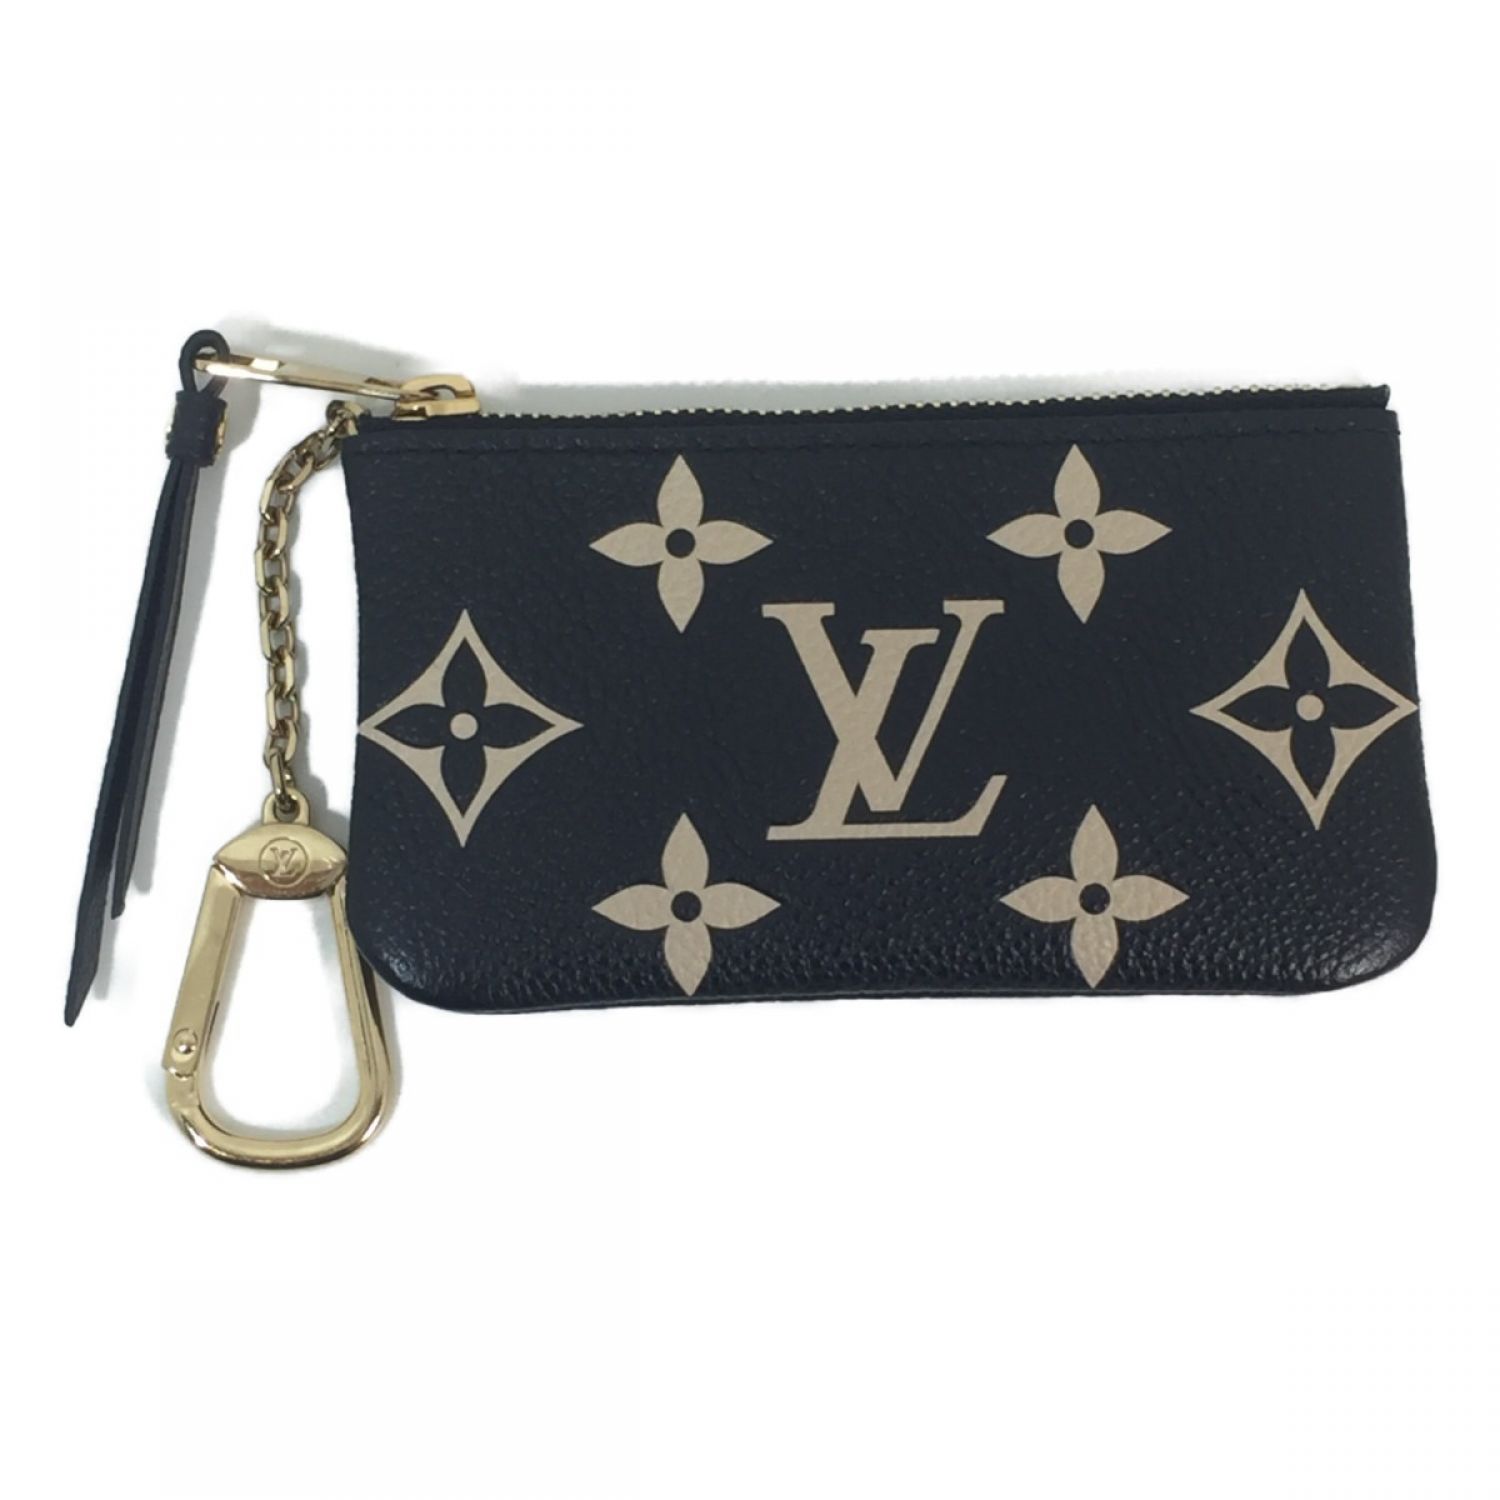 ◎◎LOUIS VUITTON ルイヴィトン カードキーケースポシェットクレ M80885